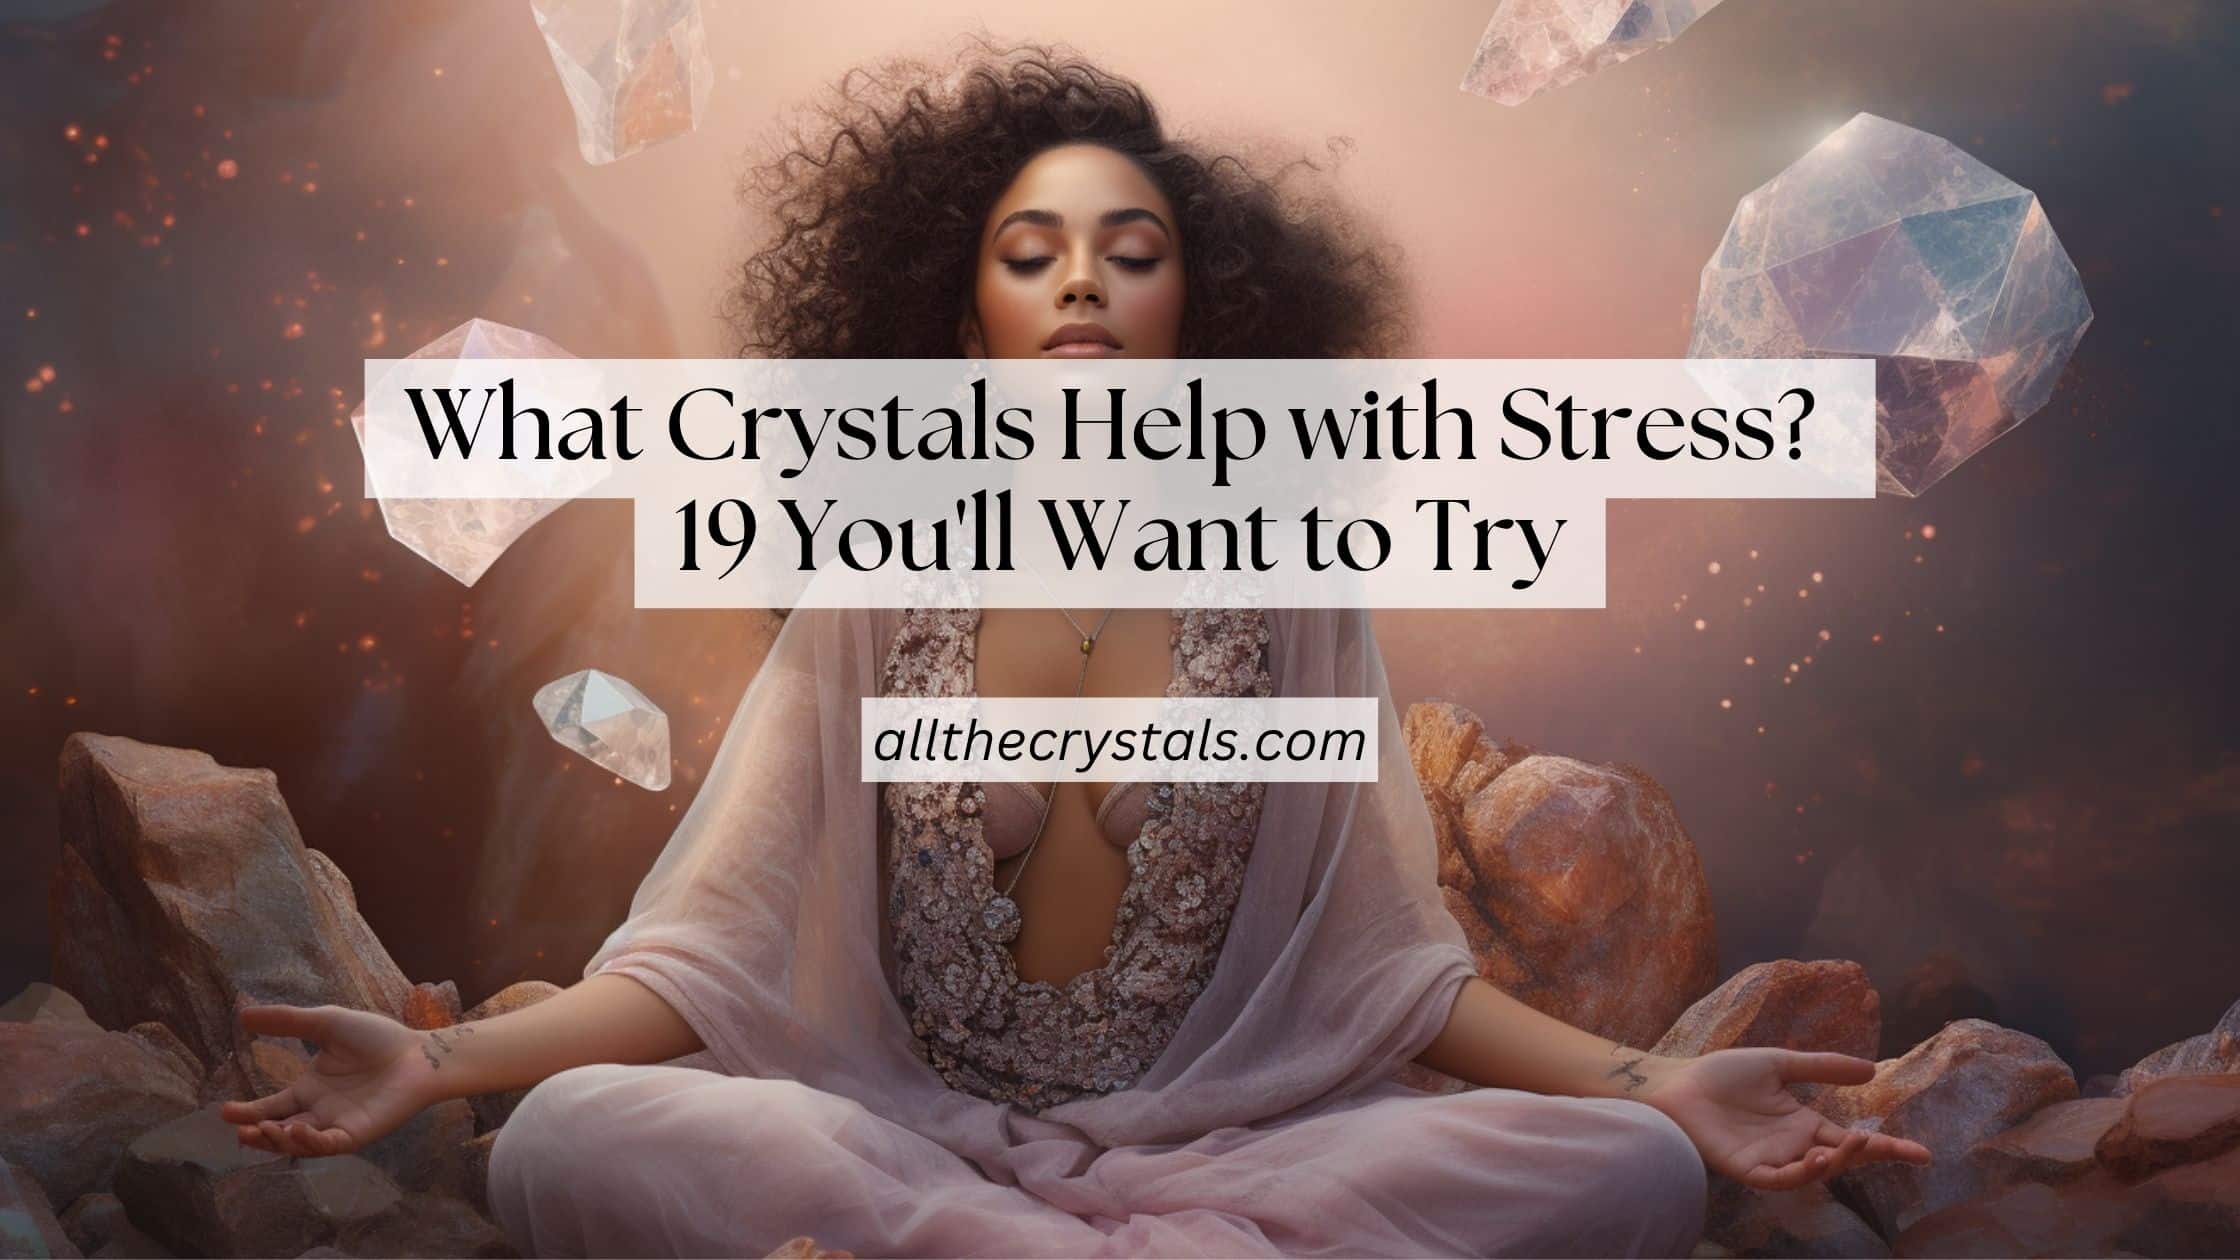 What Crystals Help with Stress? 19 You'll Want to Try